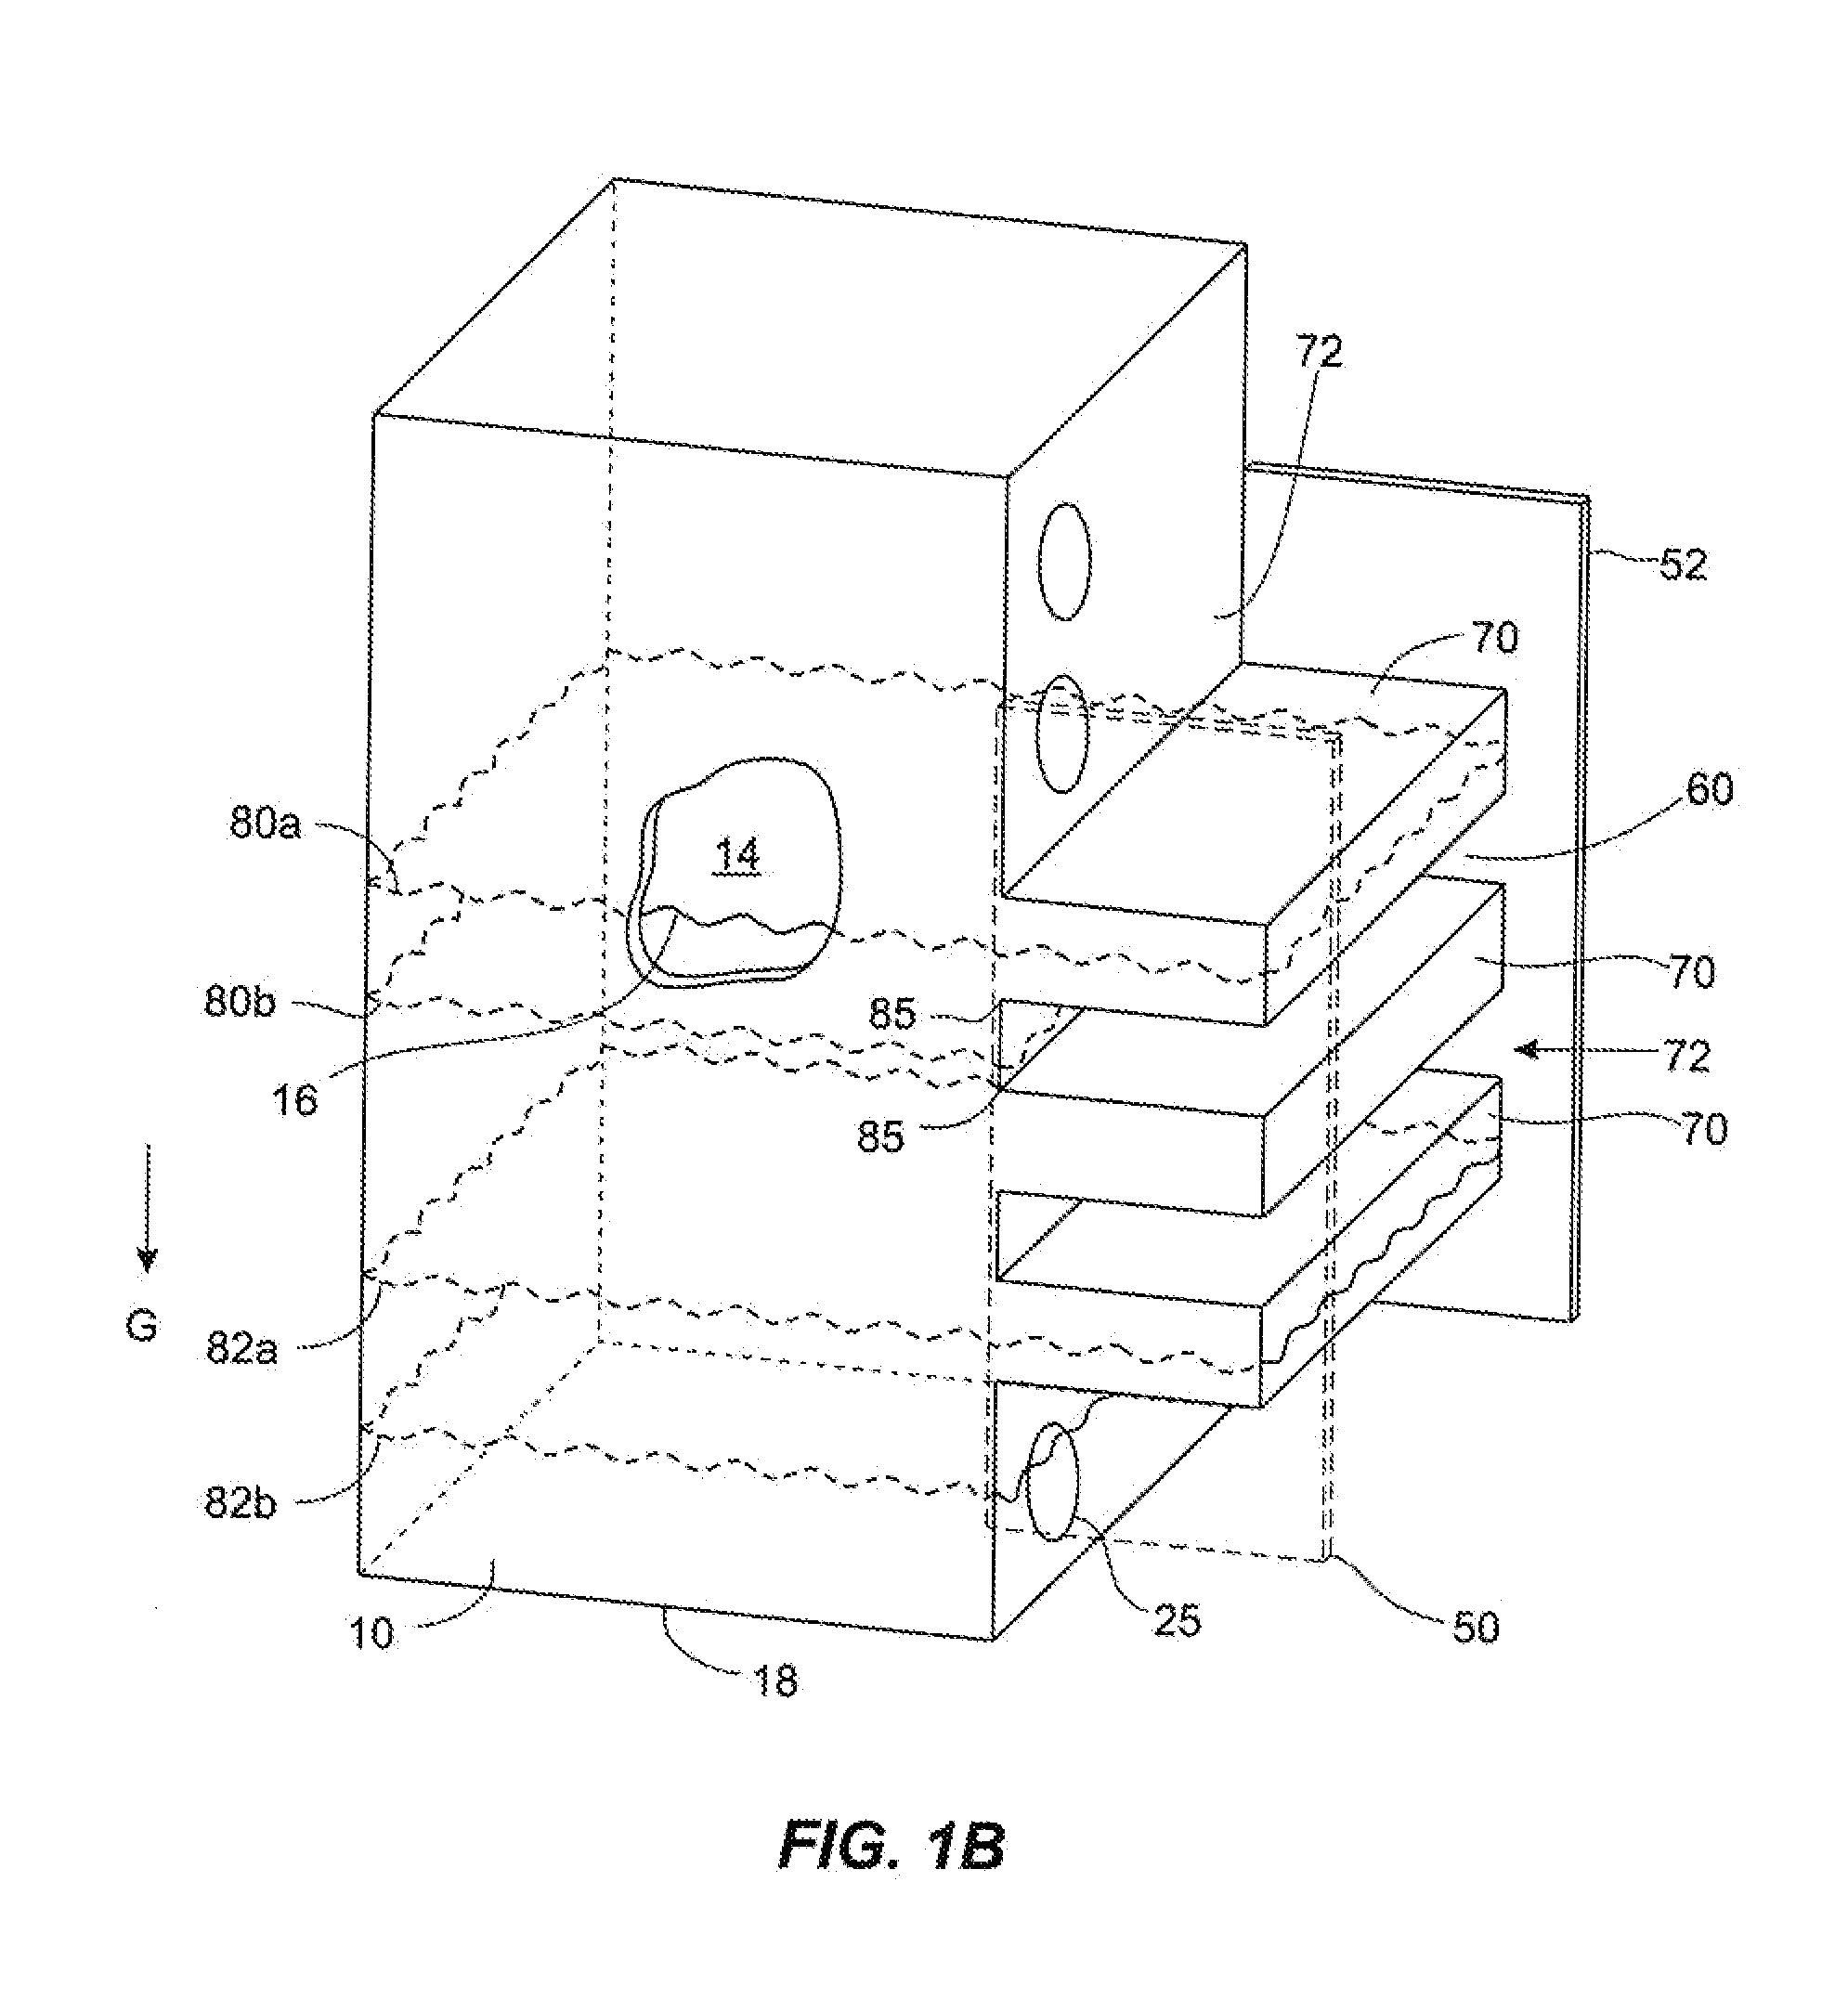 Consumable supply item with capacitive fluid level detection for micro-fluid applications